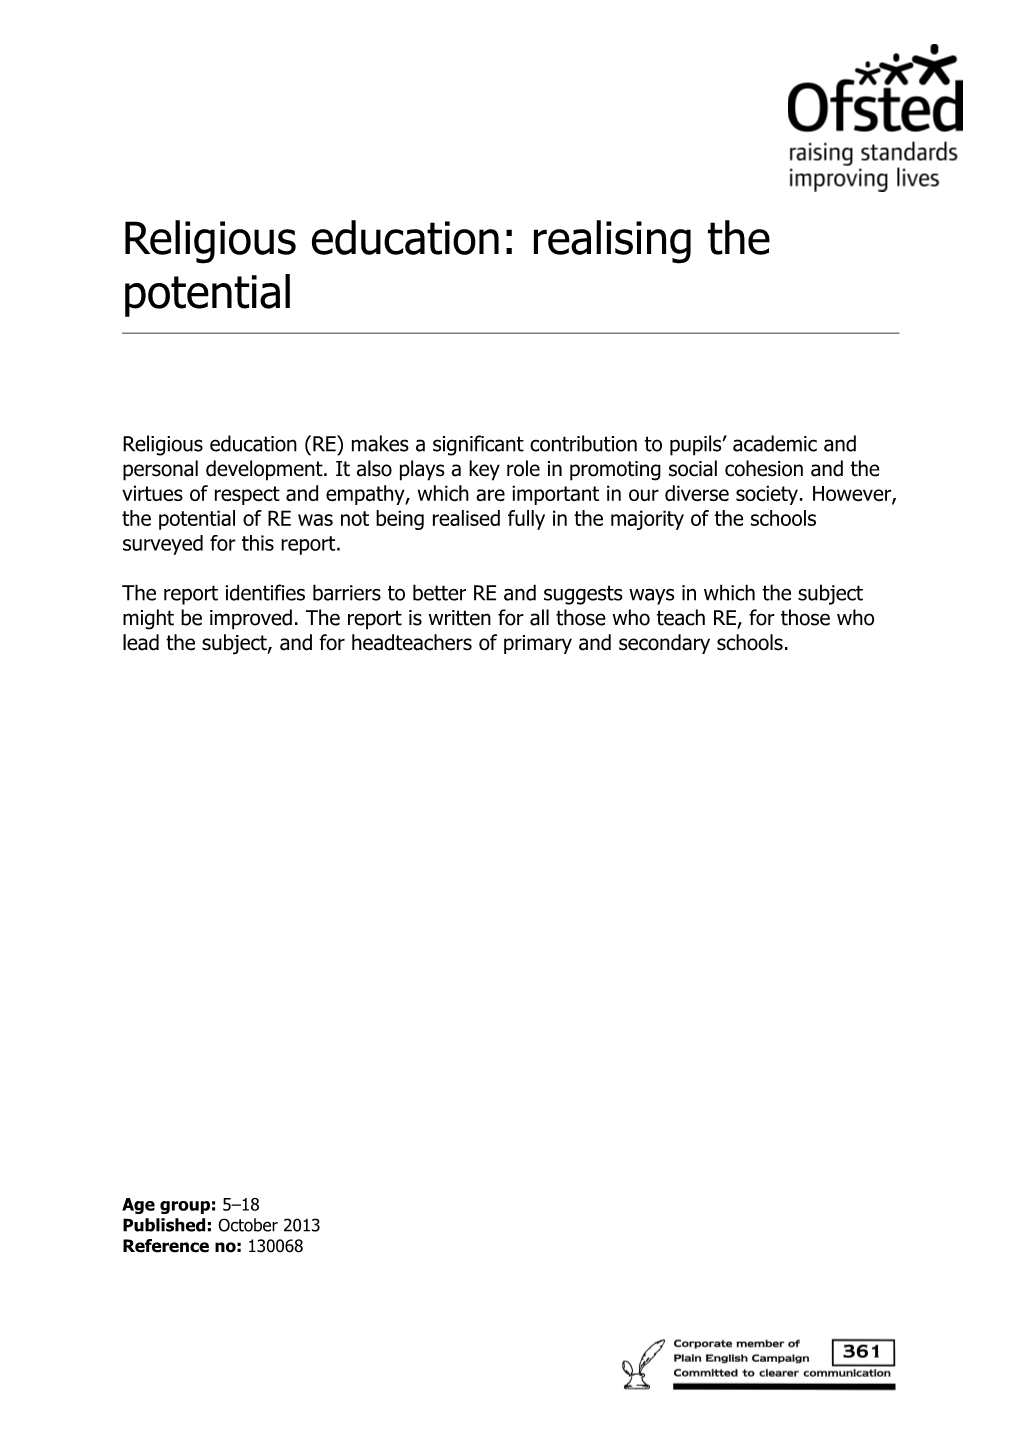 Religious Education: Realising the Potential